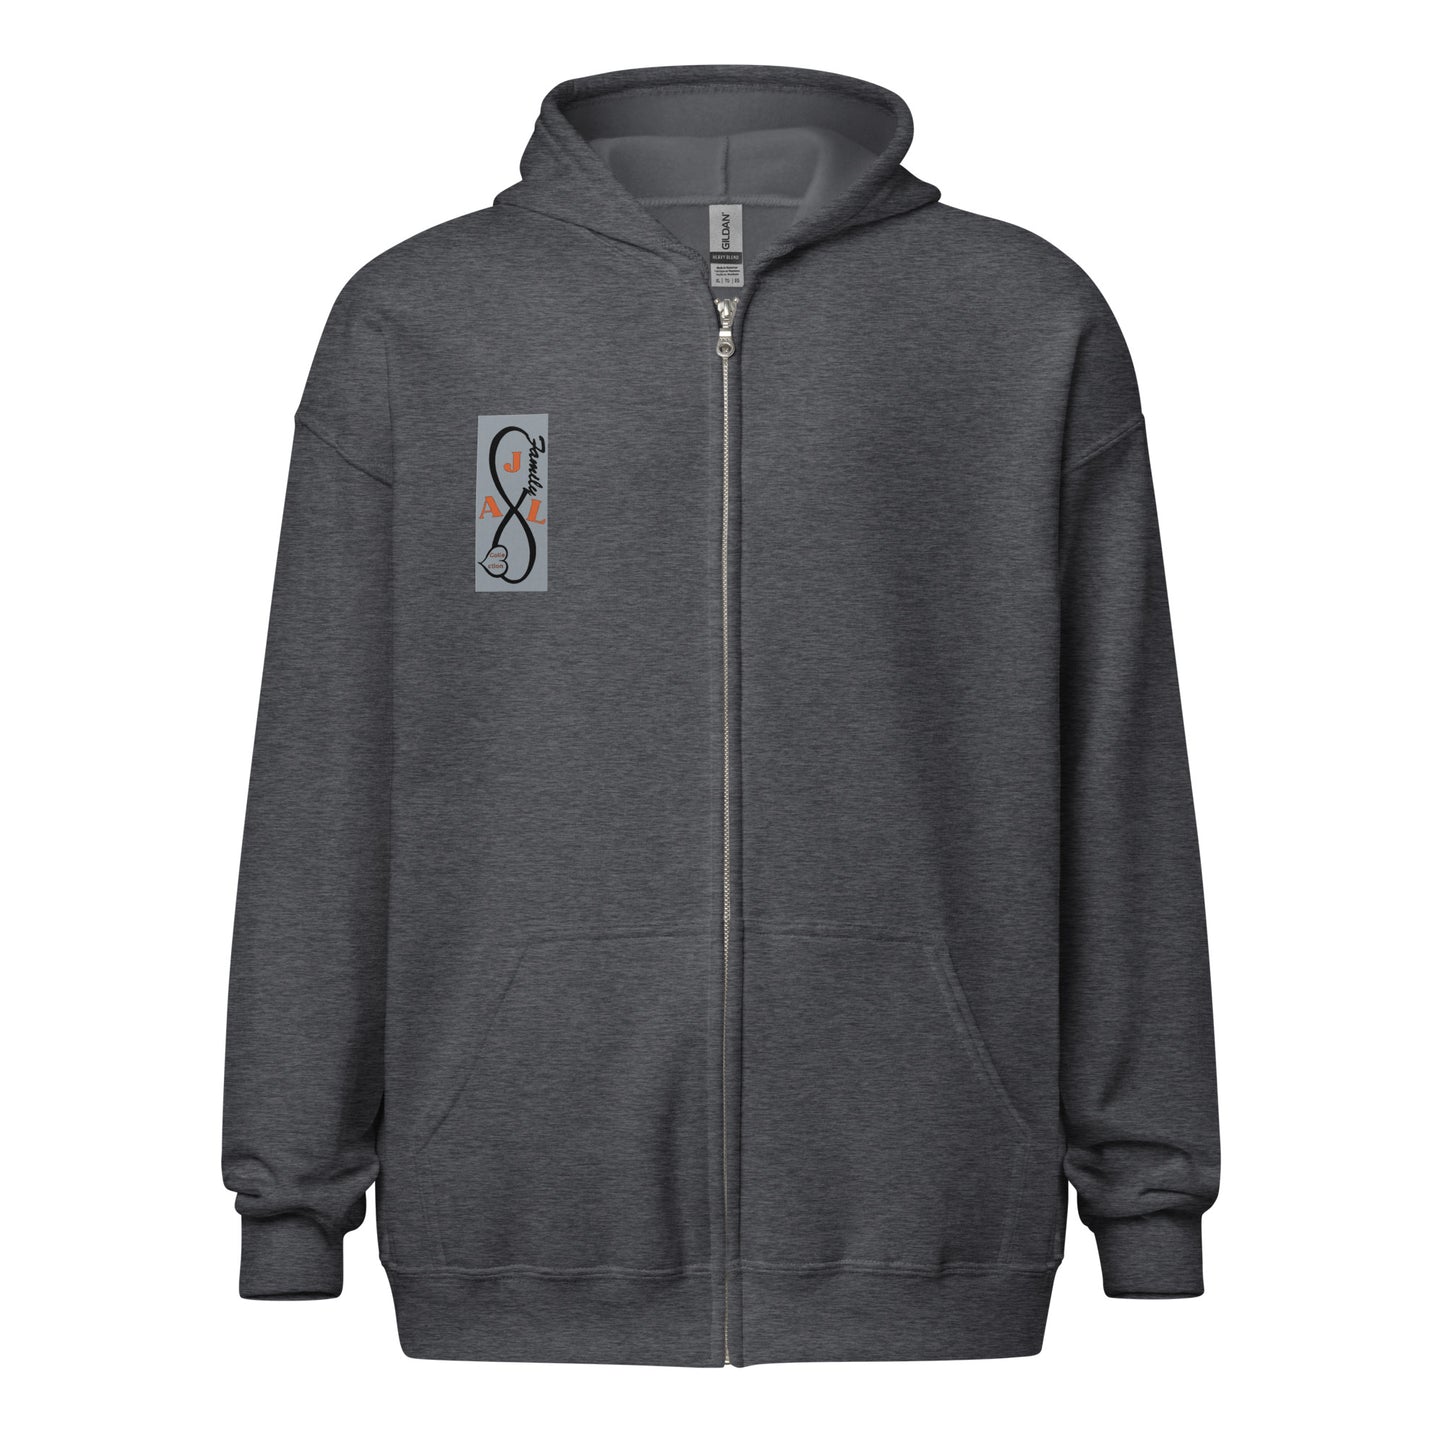 AJL Collection zip hoodie